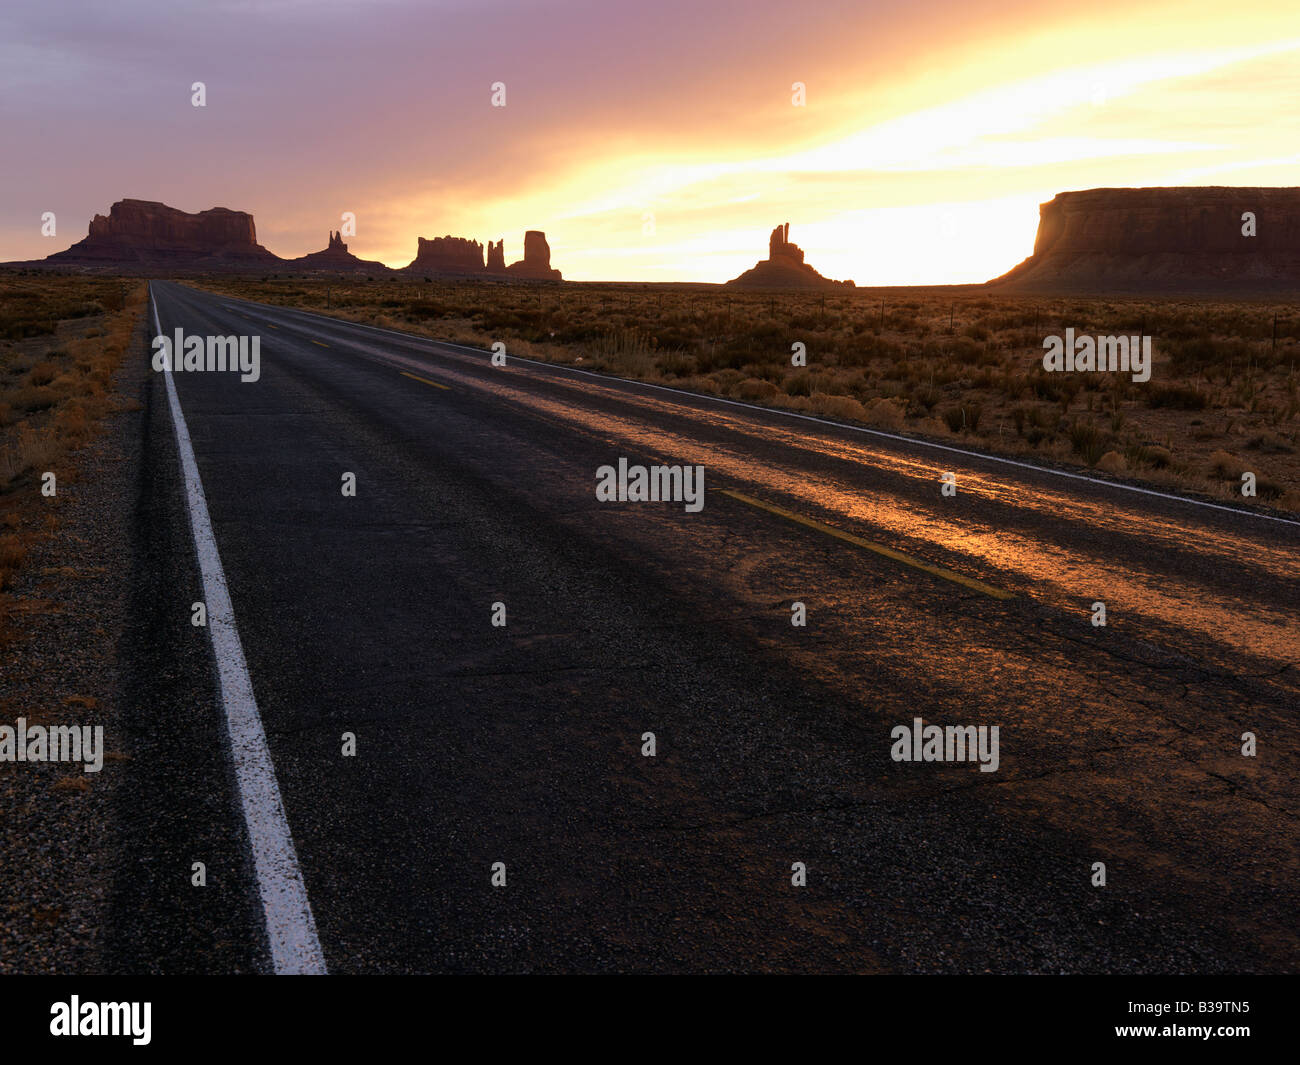 Scenic sunset landscape of highway in Monument Valley on the border of Arizona and Utah United States Stock Photo